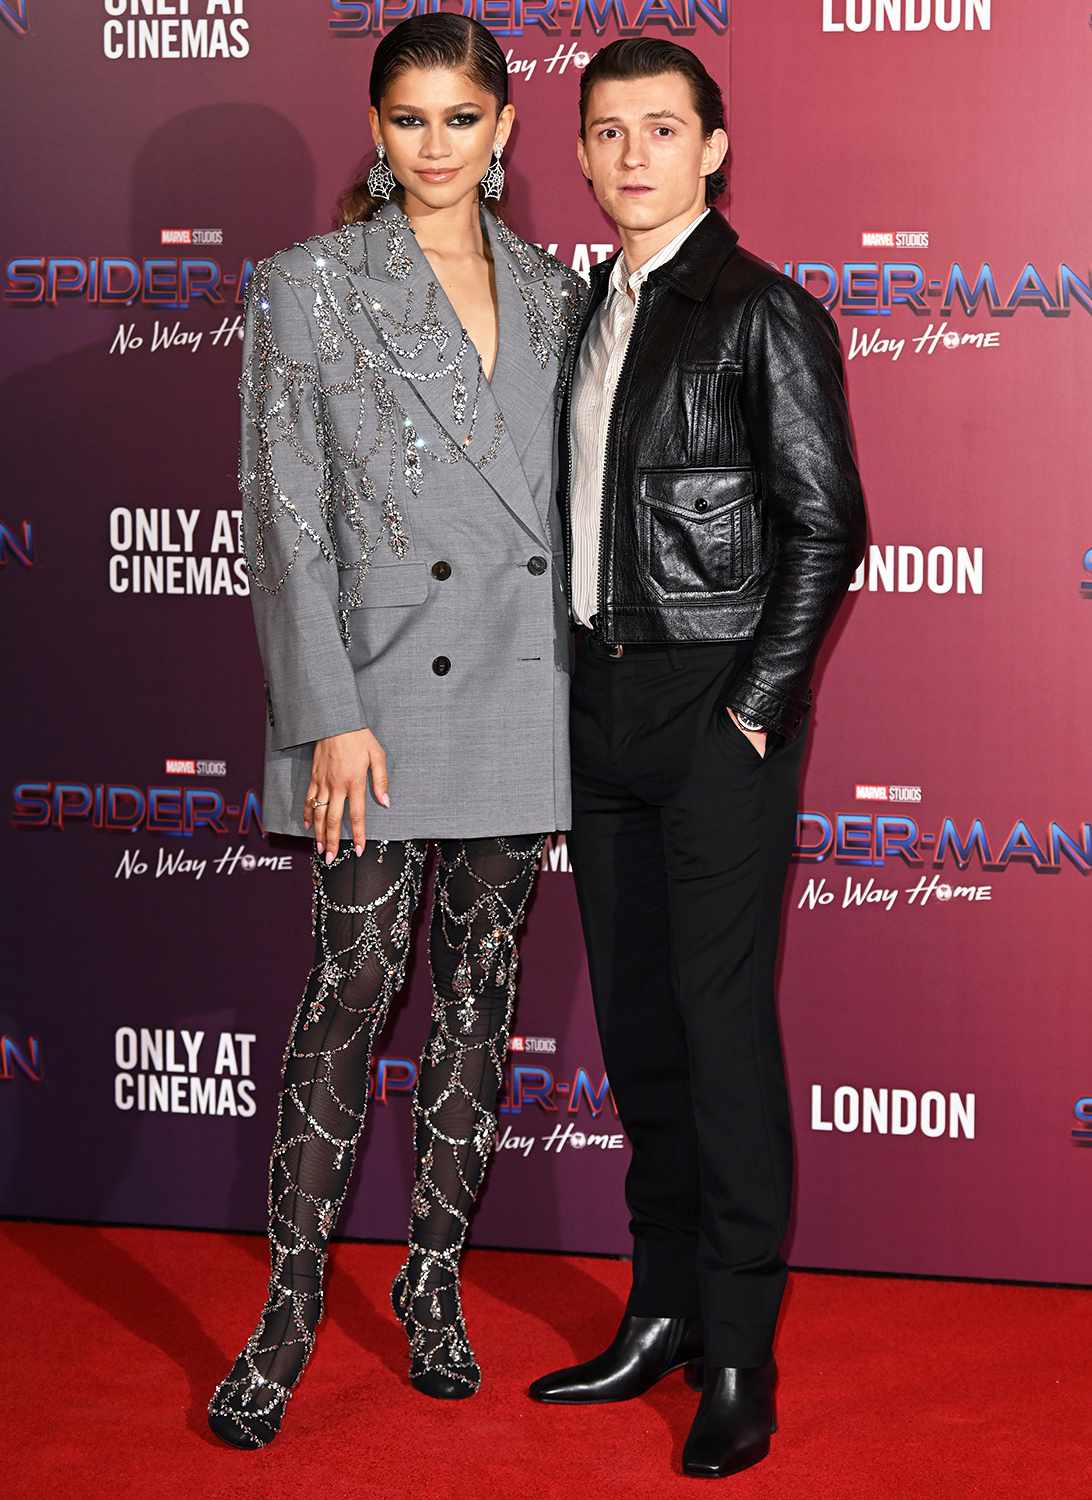 Zendaya and Tom Holland attend a photocall for "Spiderman: No Way Home" at The Old Sessions House on December 05, 2021 in London, England.